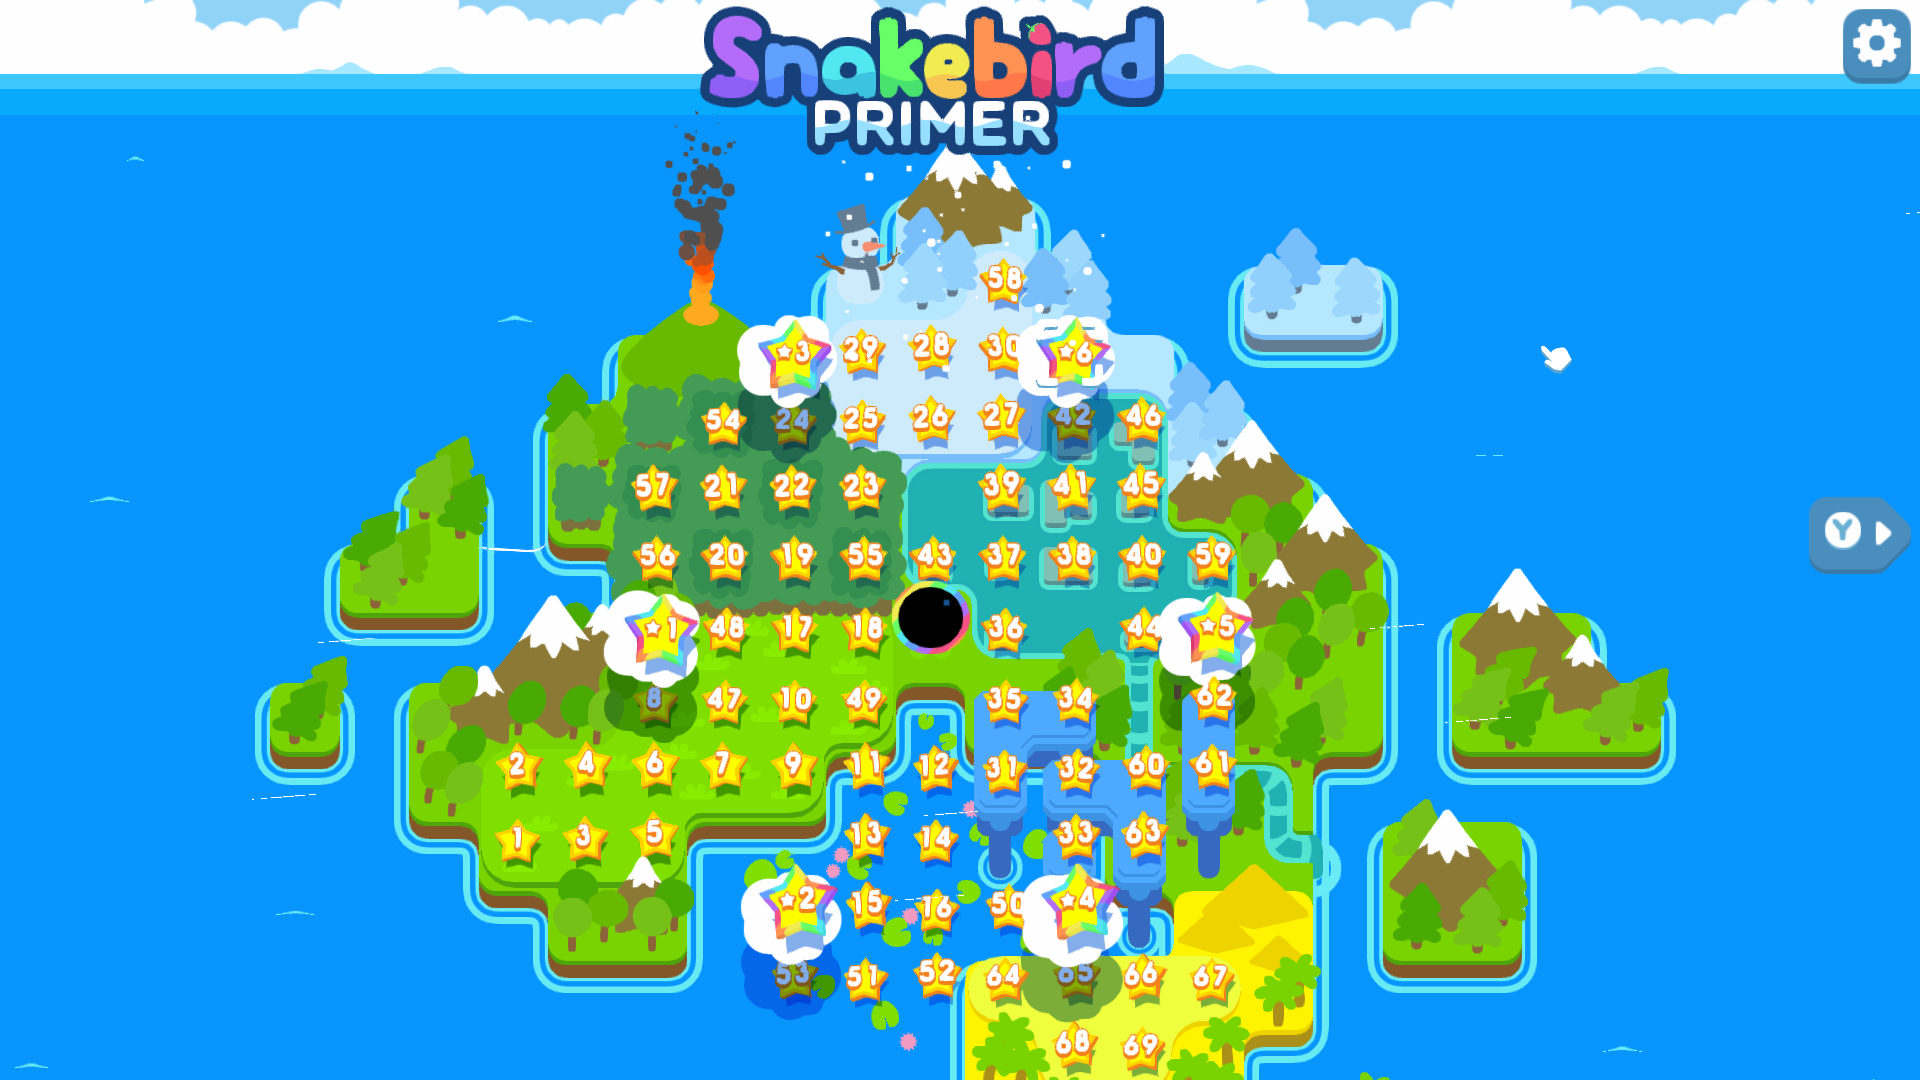 A screenshot of Snakebird Complete, showing the Snakebird Primer island. All of the levels are completed.
